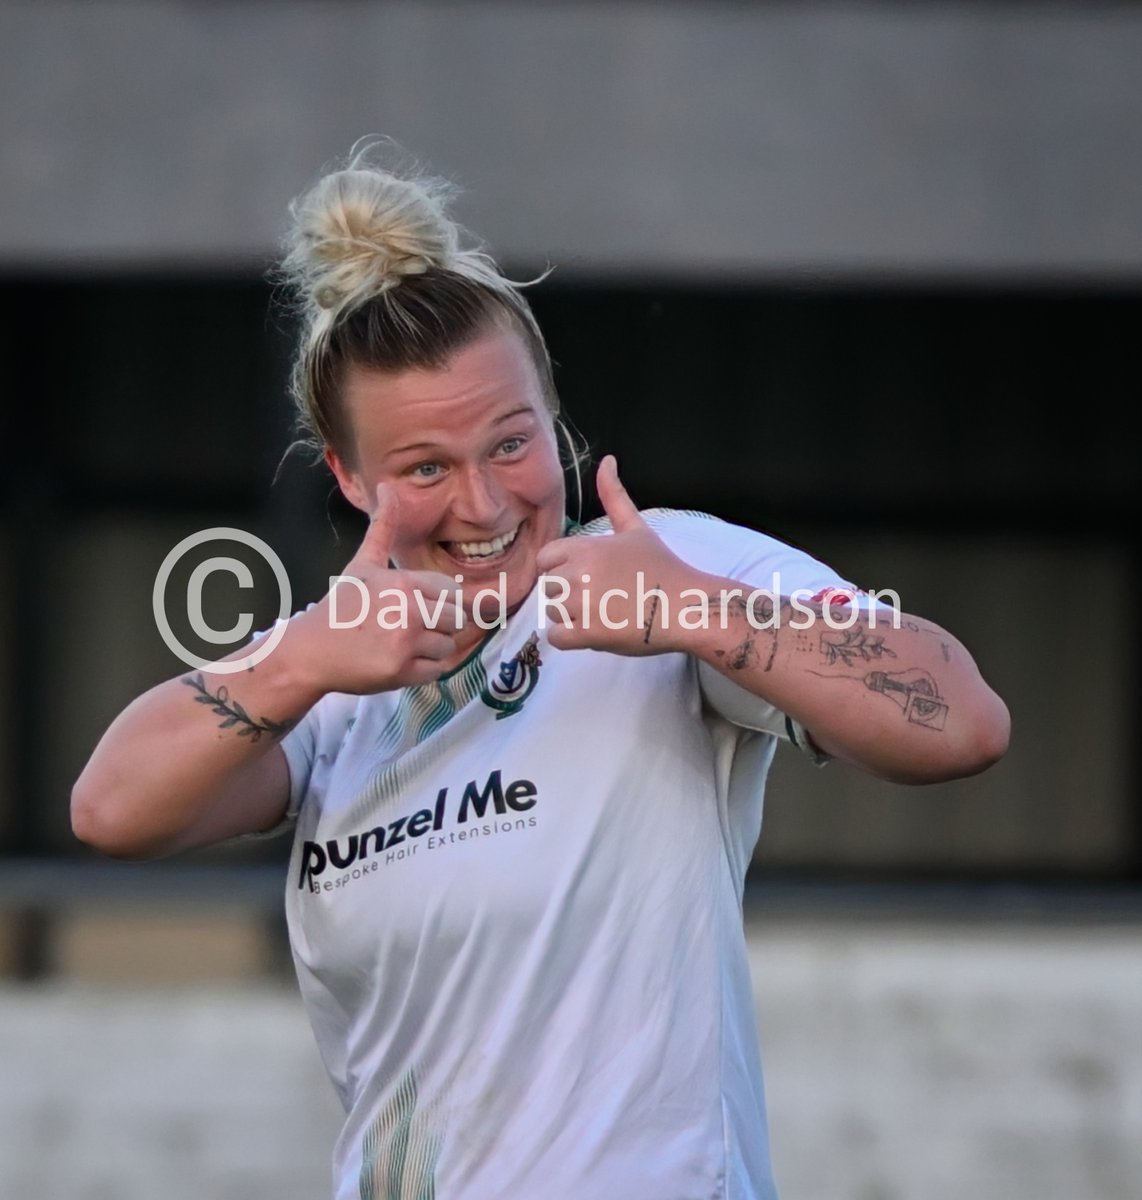 Great result for the women as @rocks1883 Rockettes won 2-1 in their penultimate fixture of the season against @SteyningTown. The match was covered by @drichardsonpics and his photos are now ready to view/download on Flickr: bit.ly/3efRCga